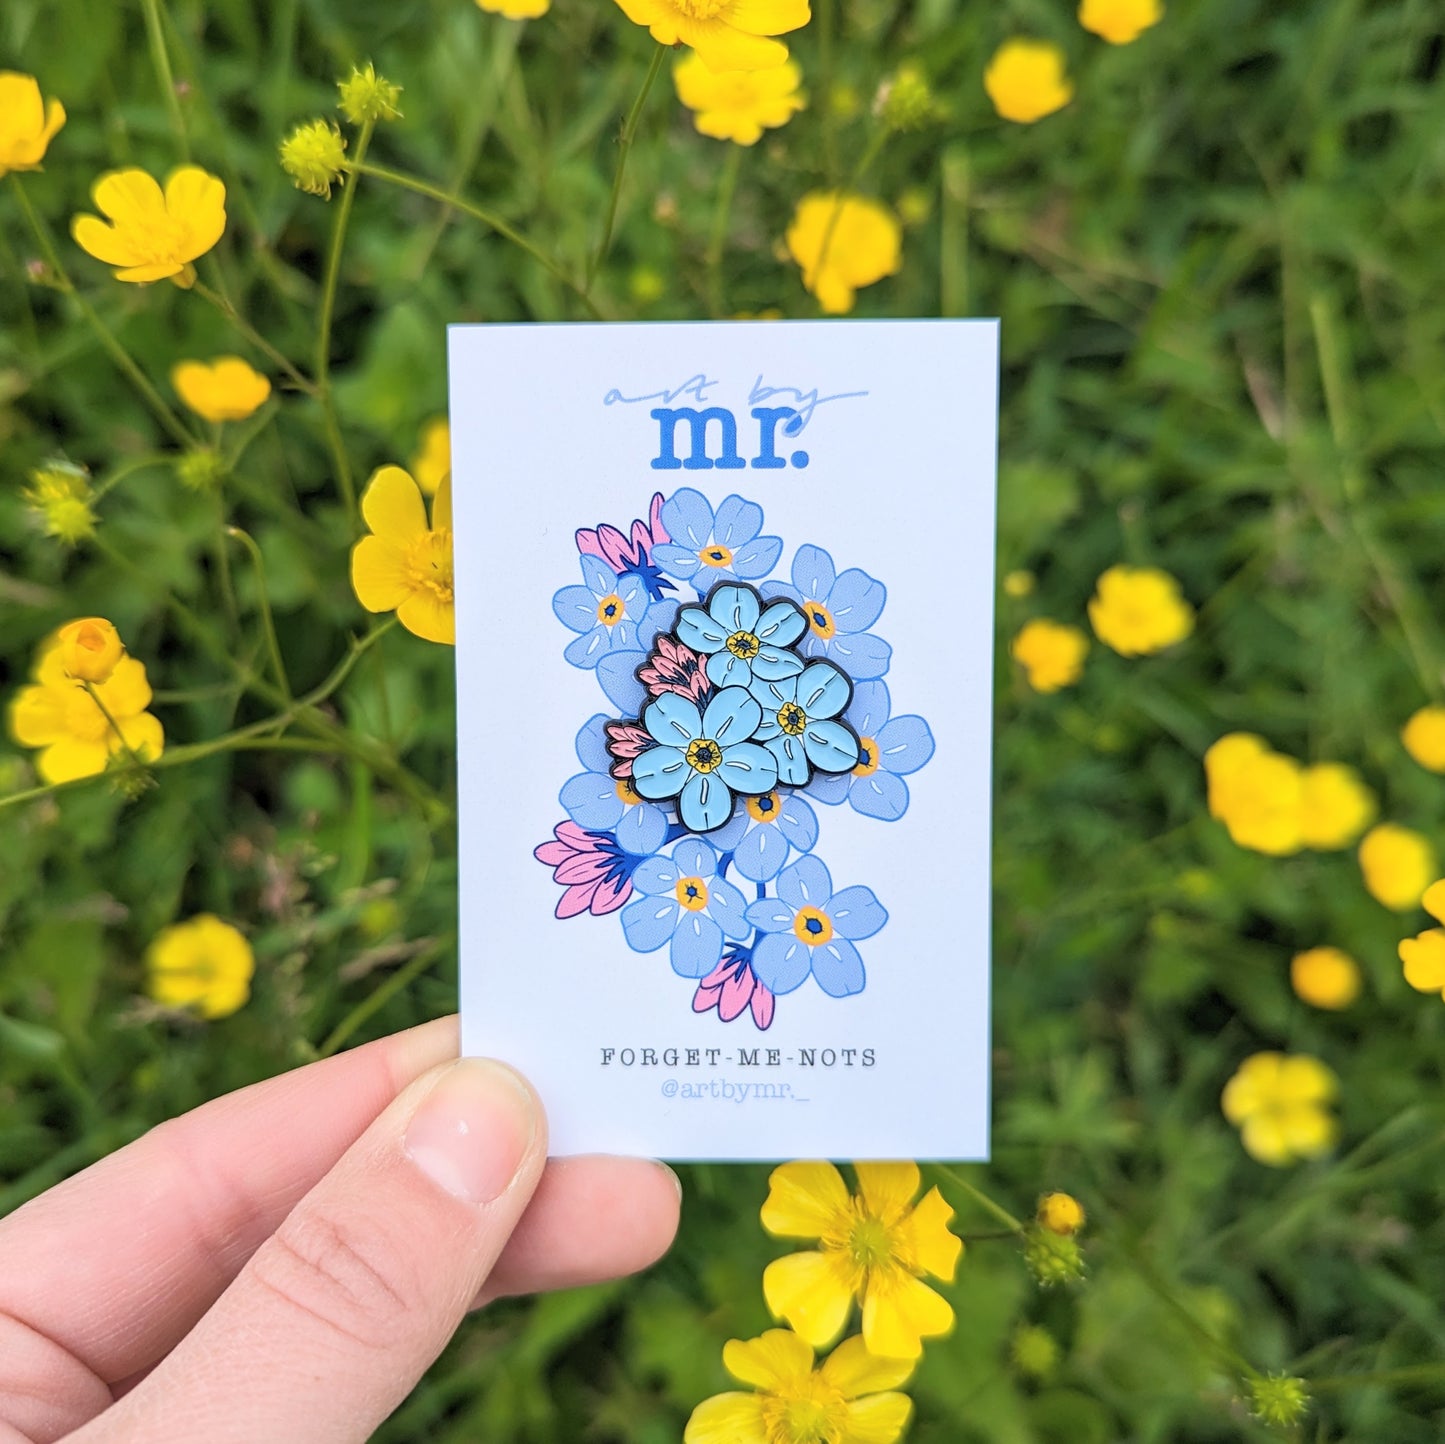 Forget-me-not Pin